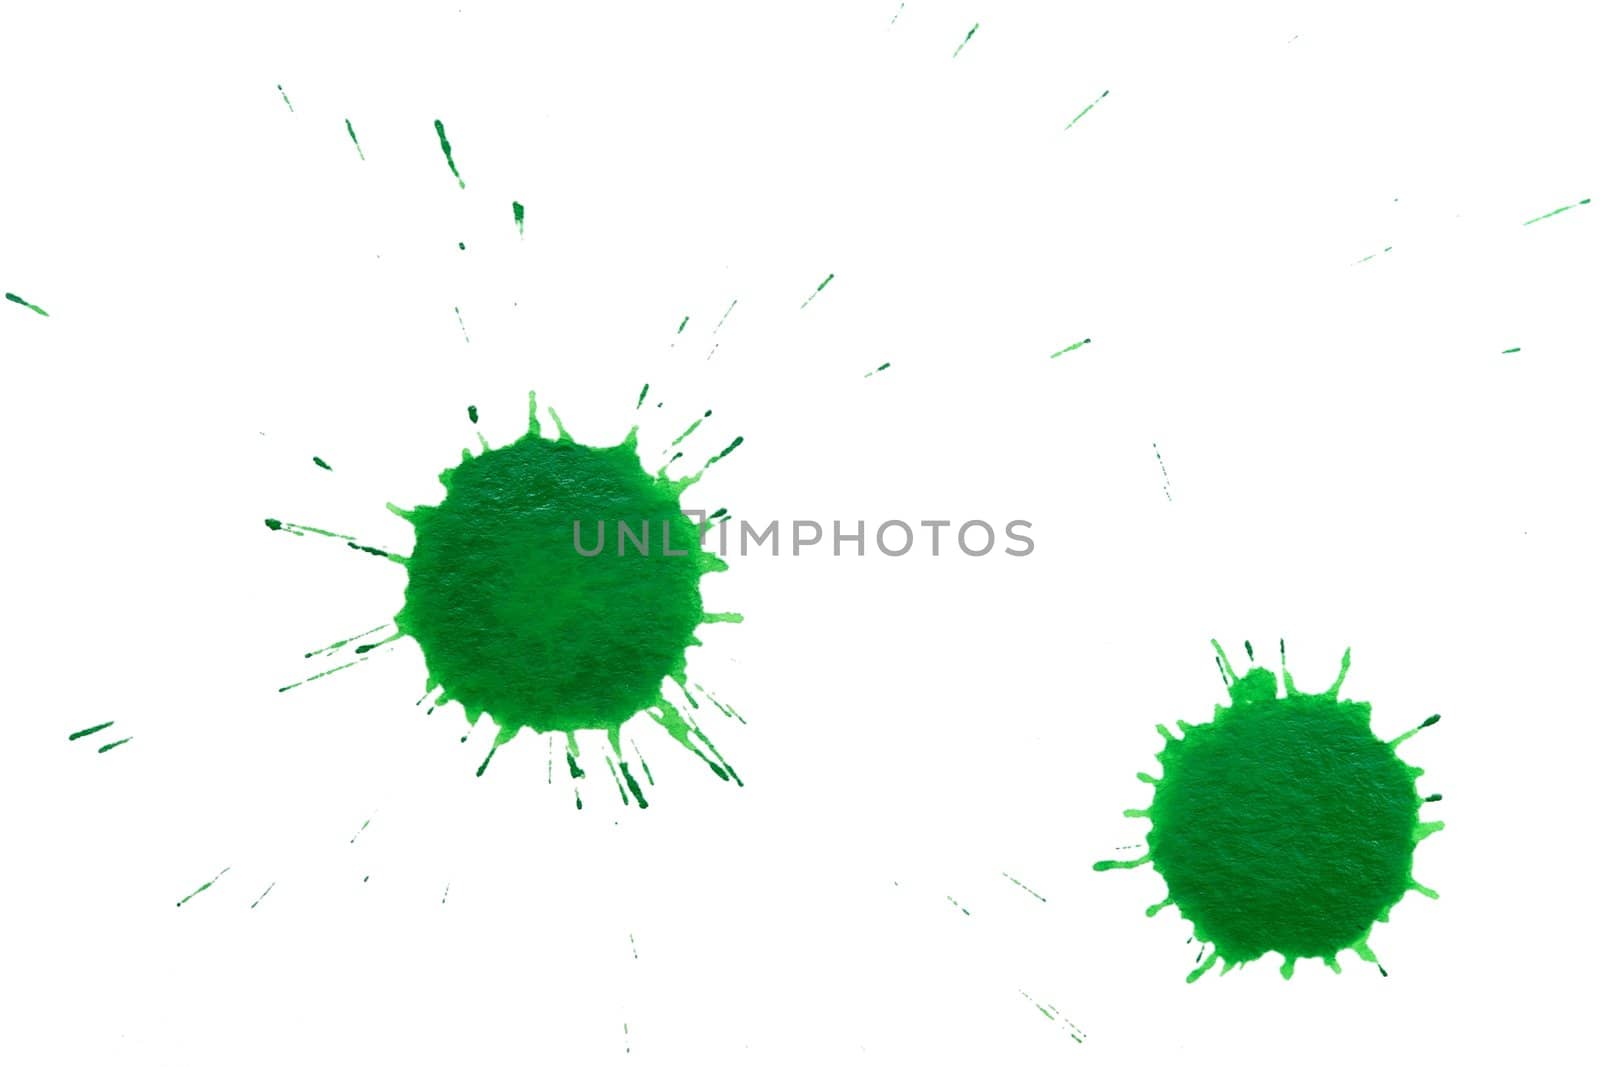 An image of green spots on white background